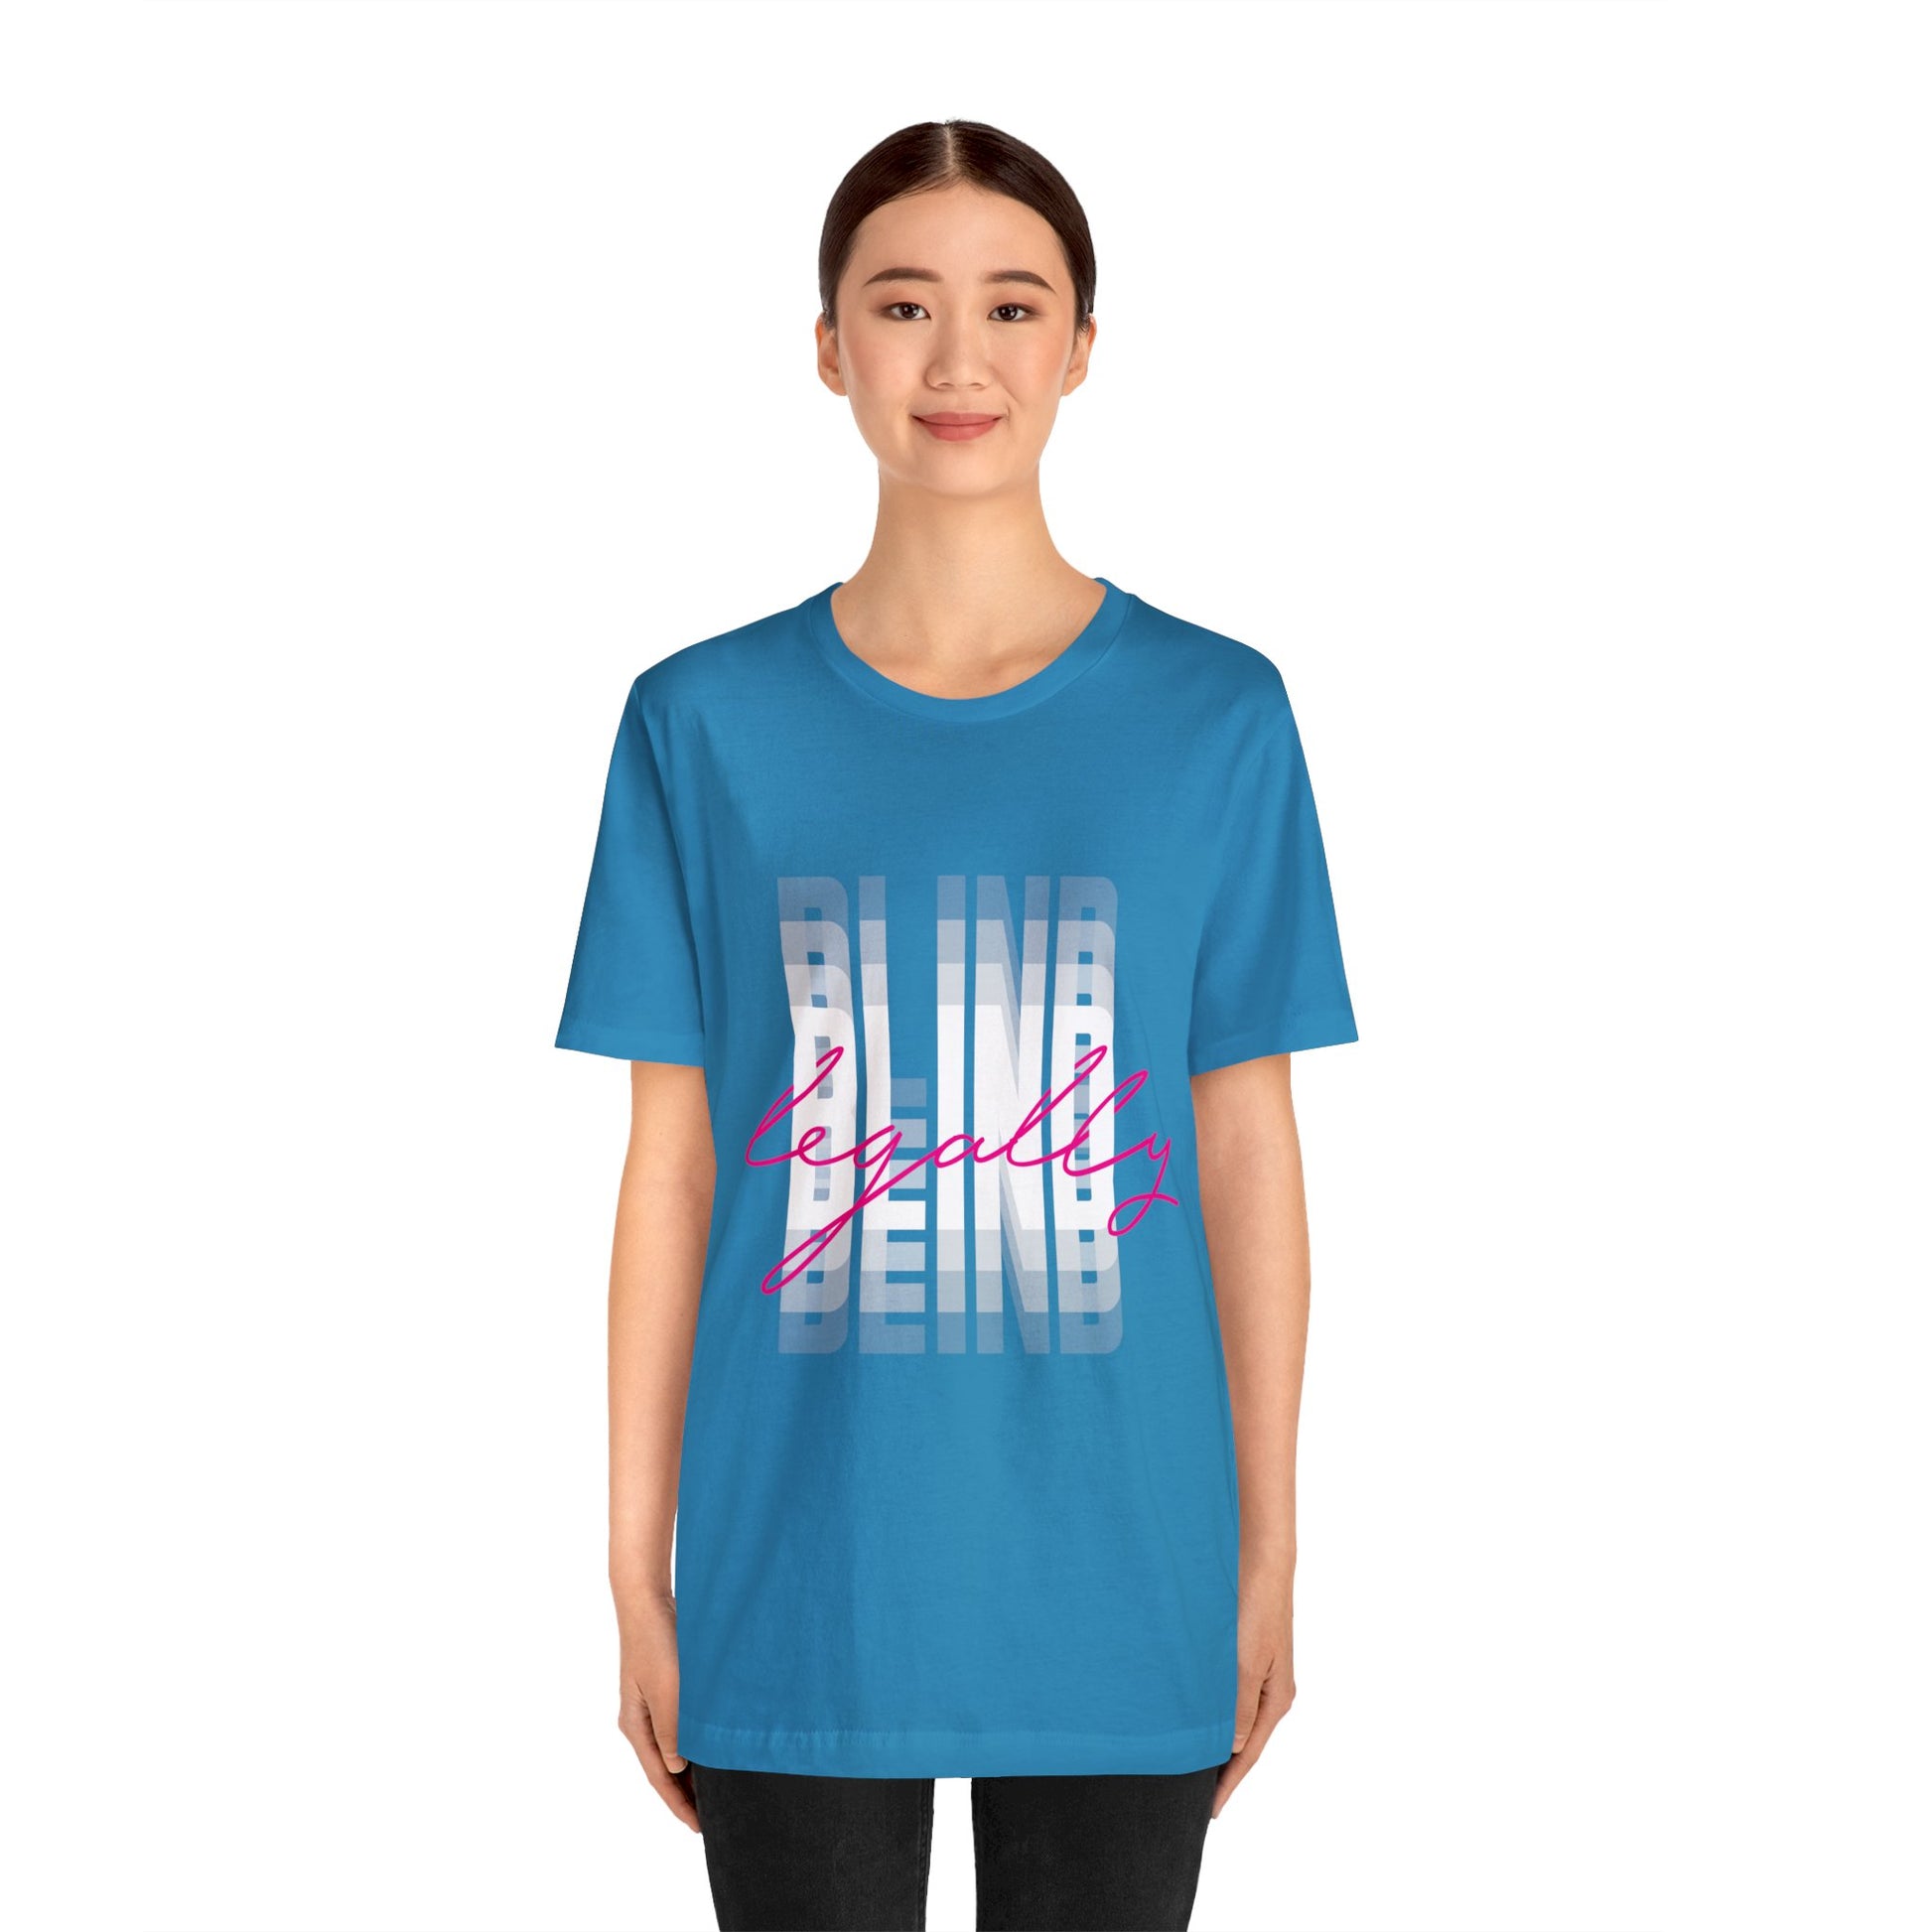 Legally Blind (Blurry) w/ pink- Unisex Jersey Short Sleeve Tee